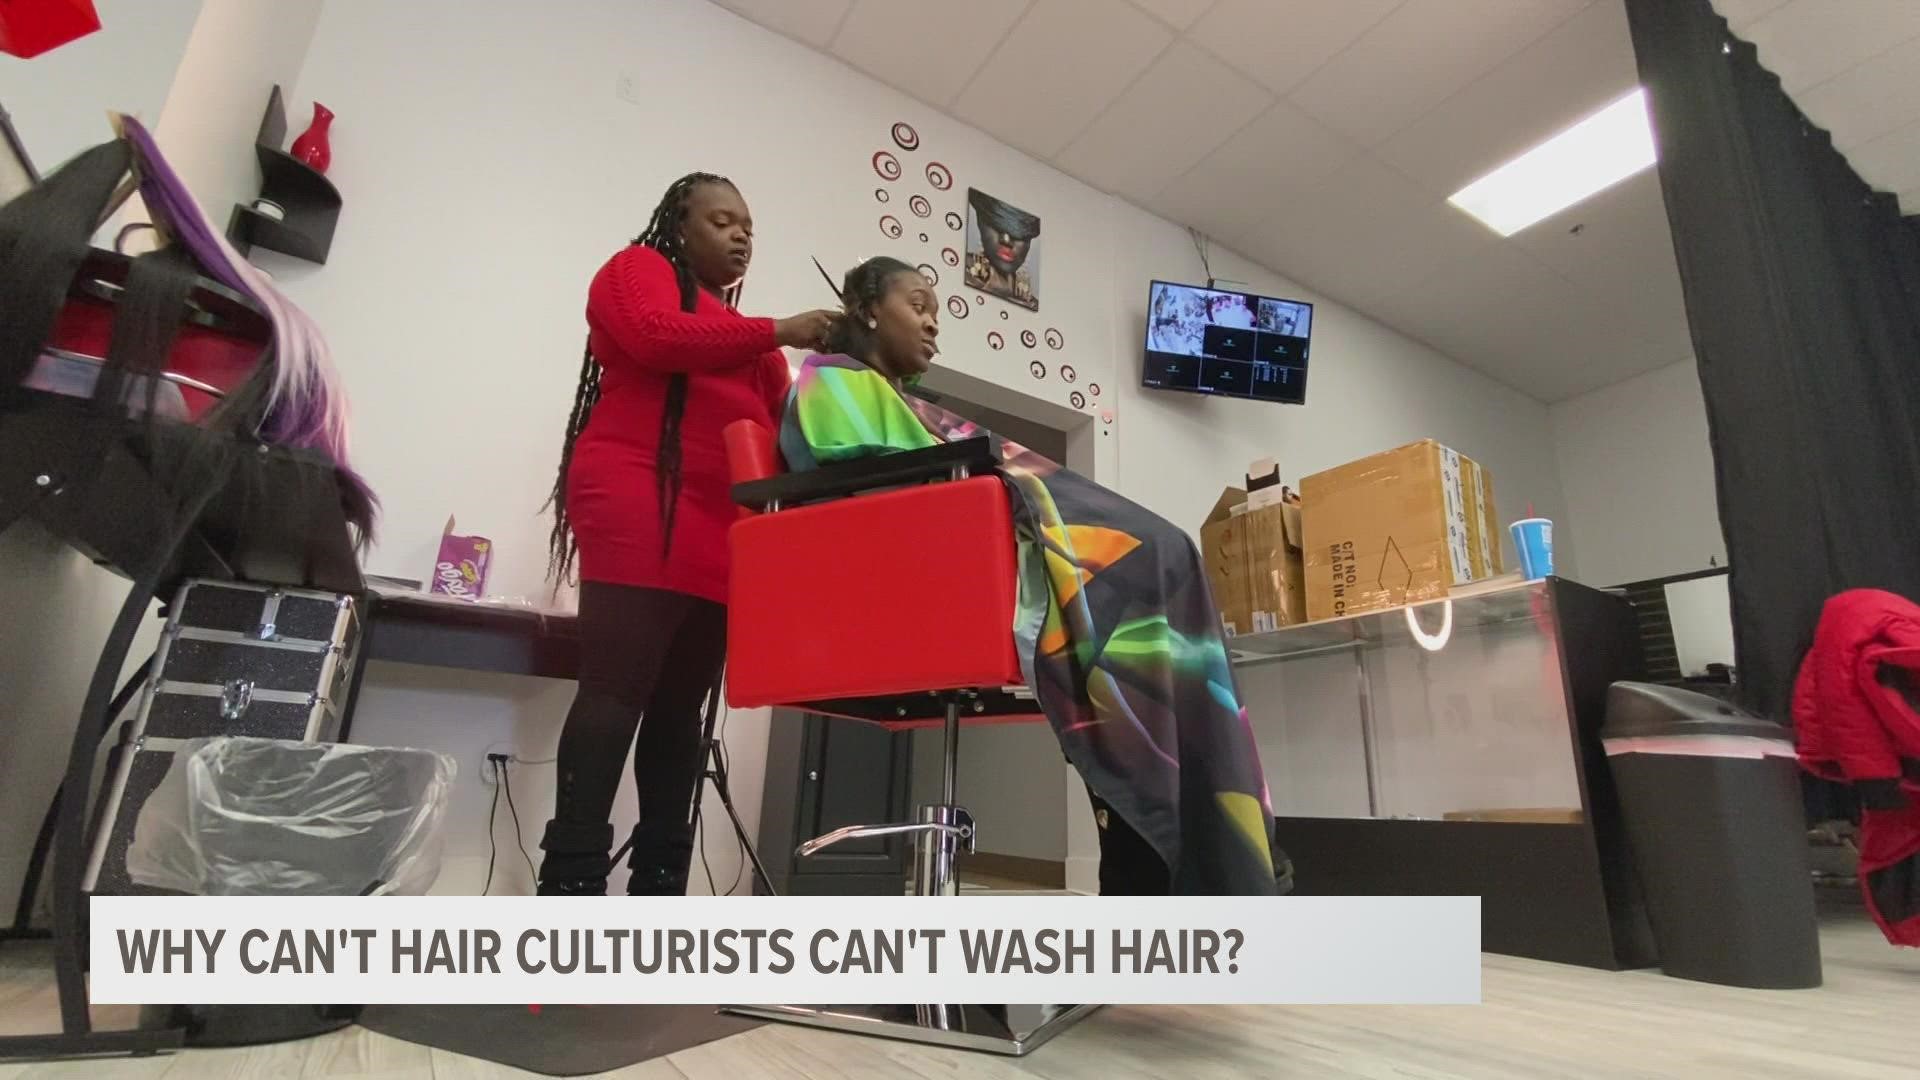 "We can only do so much as a natural hair culturist," Shaketra Payne said, "and washing hair is one of those important things we're not allowed to do."